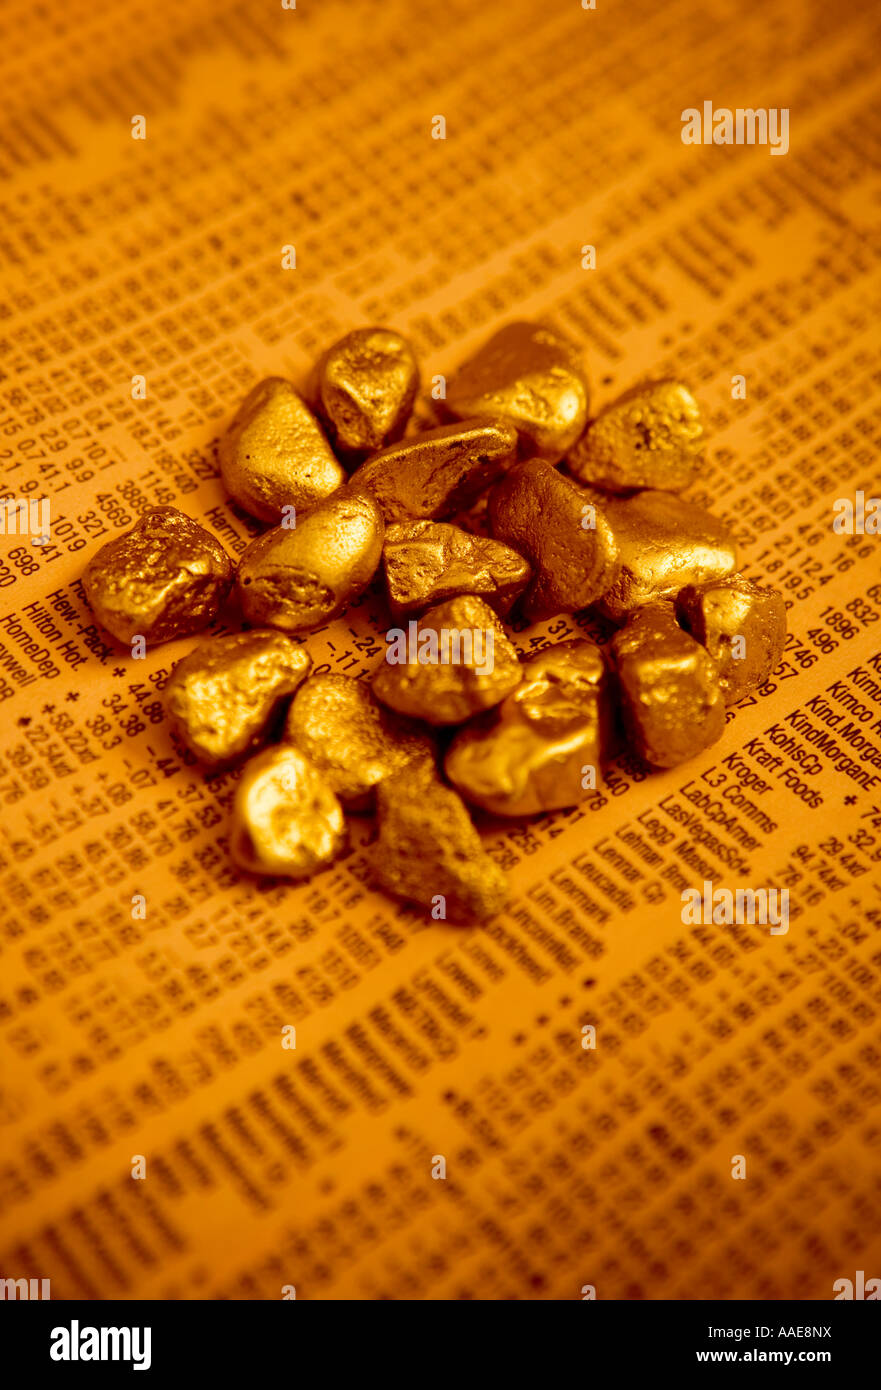 Studio shot of faux gold nuggets and stocks and shares print out Stock Photo